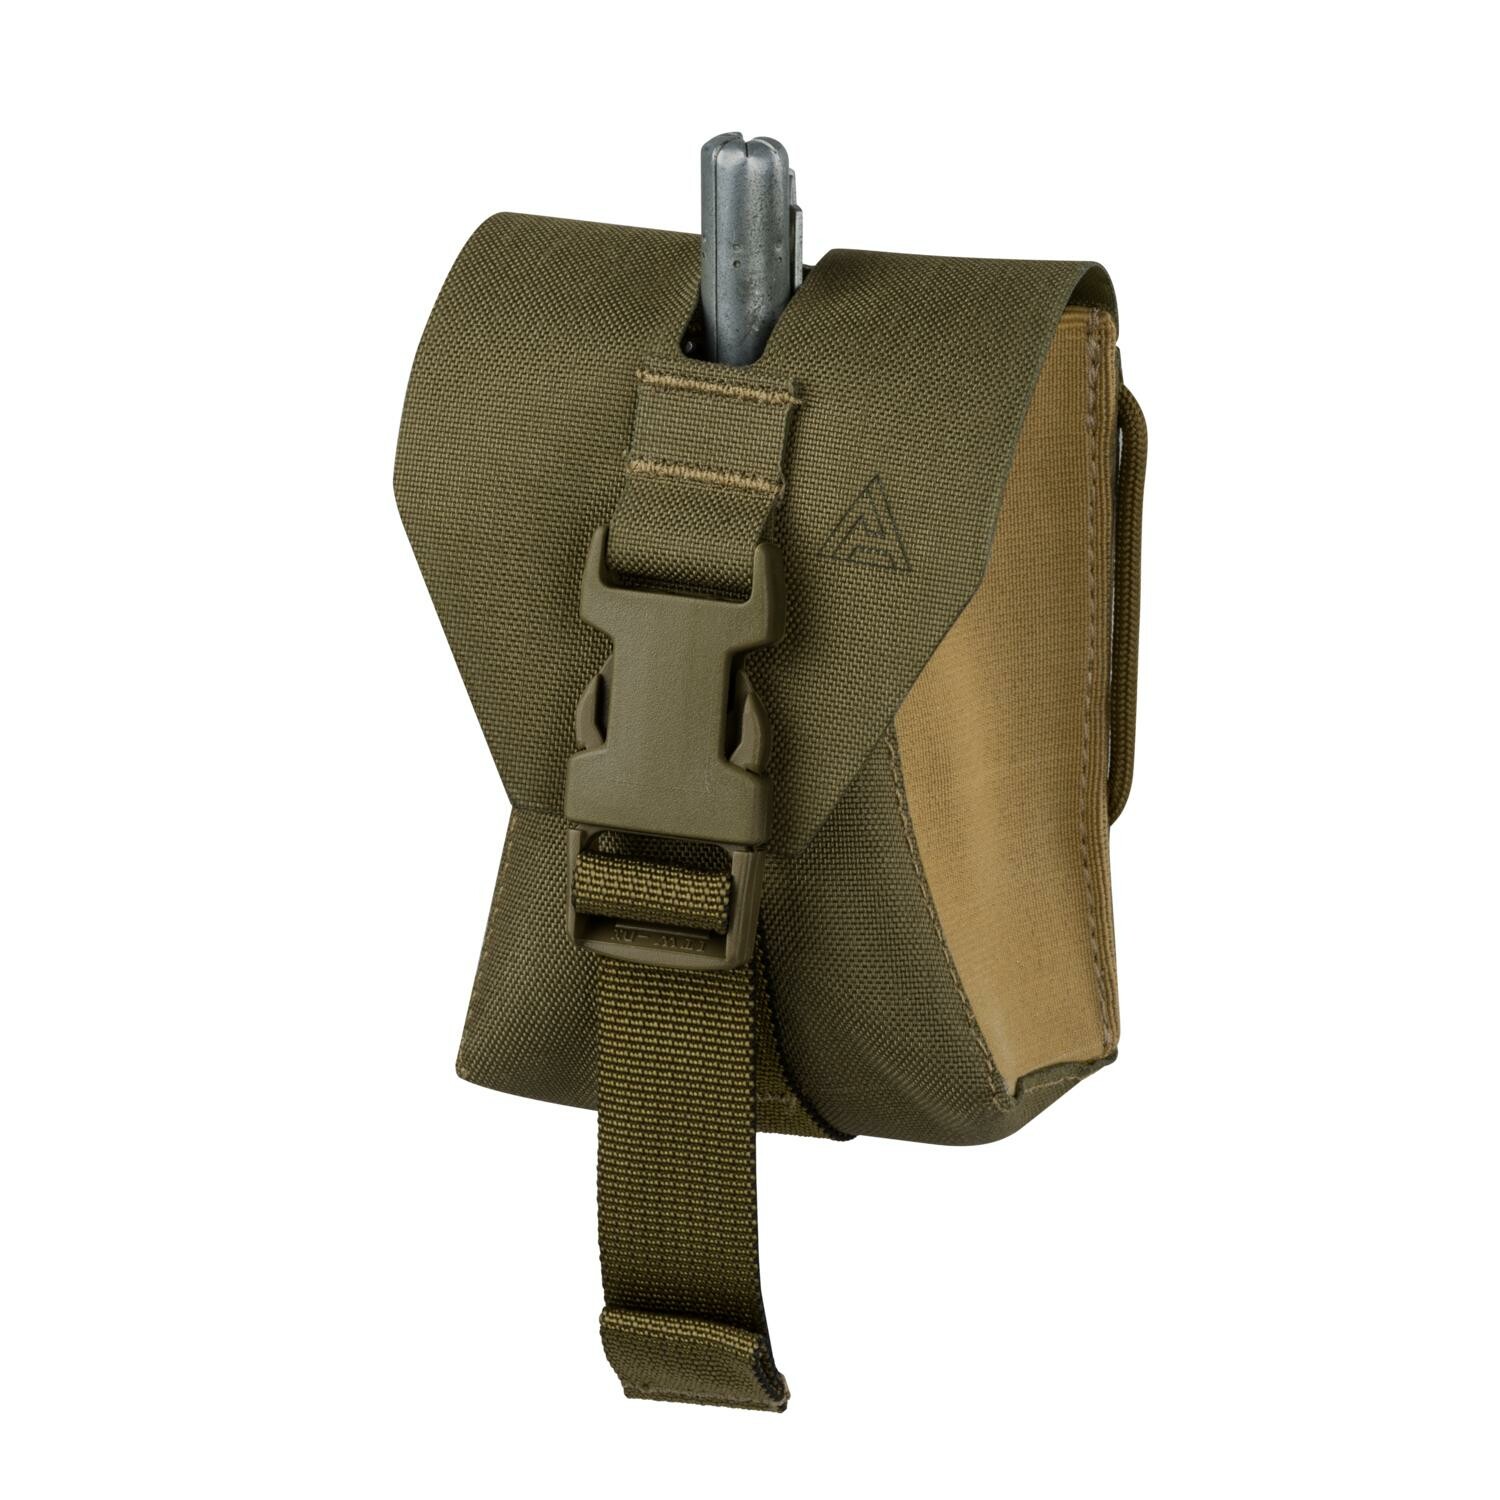 FRAG GRENADE POUCH -DIRECT ACTION